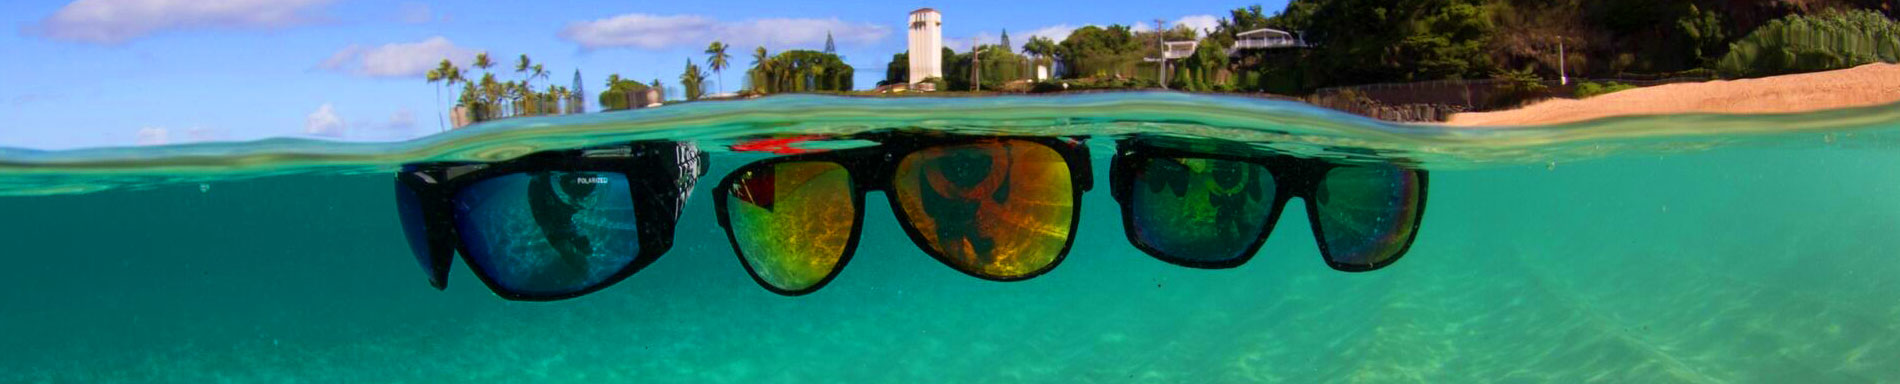 Best Selling Sunglasses That Float in Water